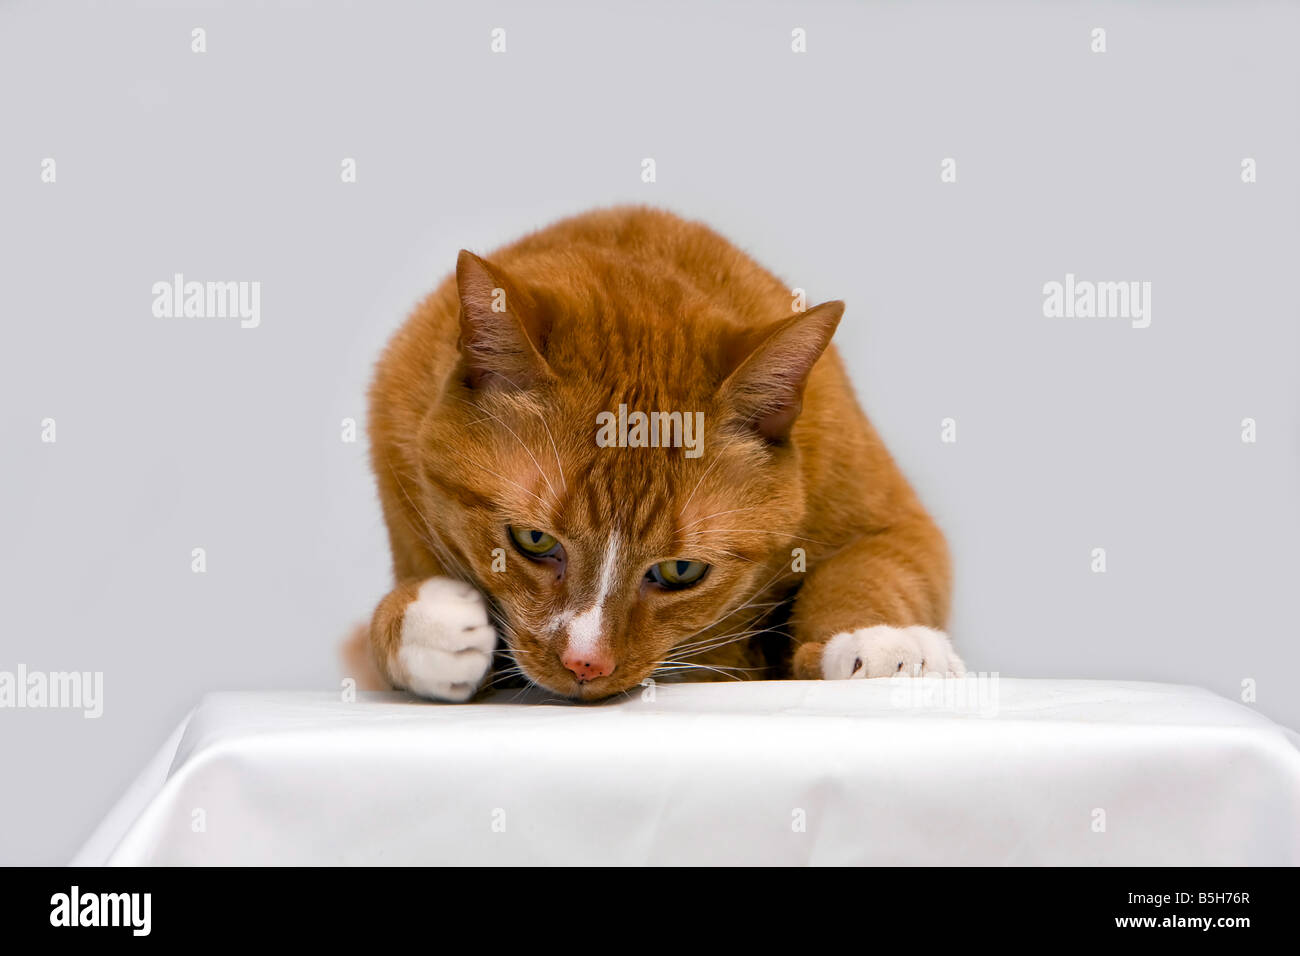 An orange cat curious to see what is underneath his paw isolated on white Stock Photo